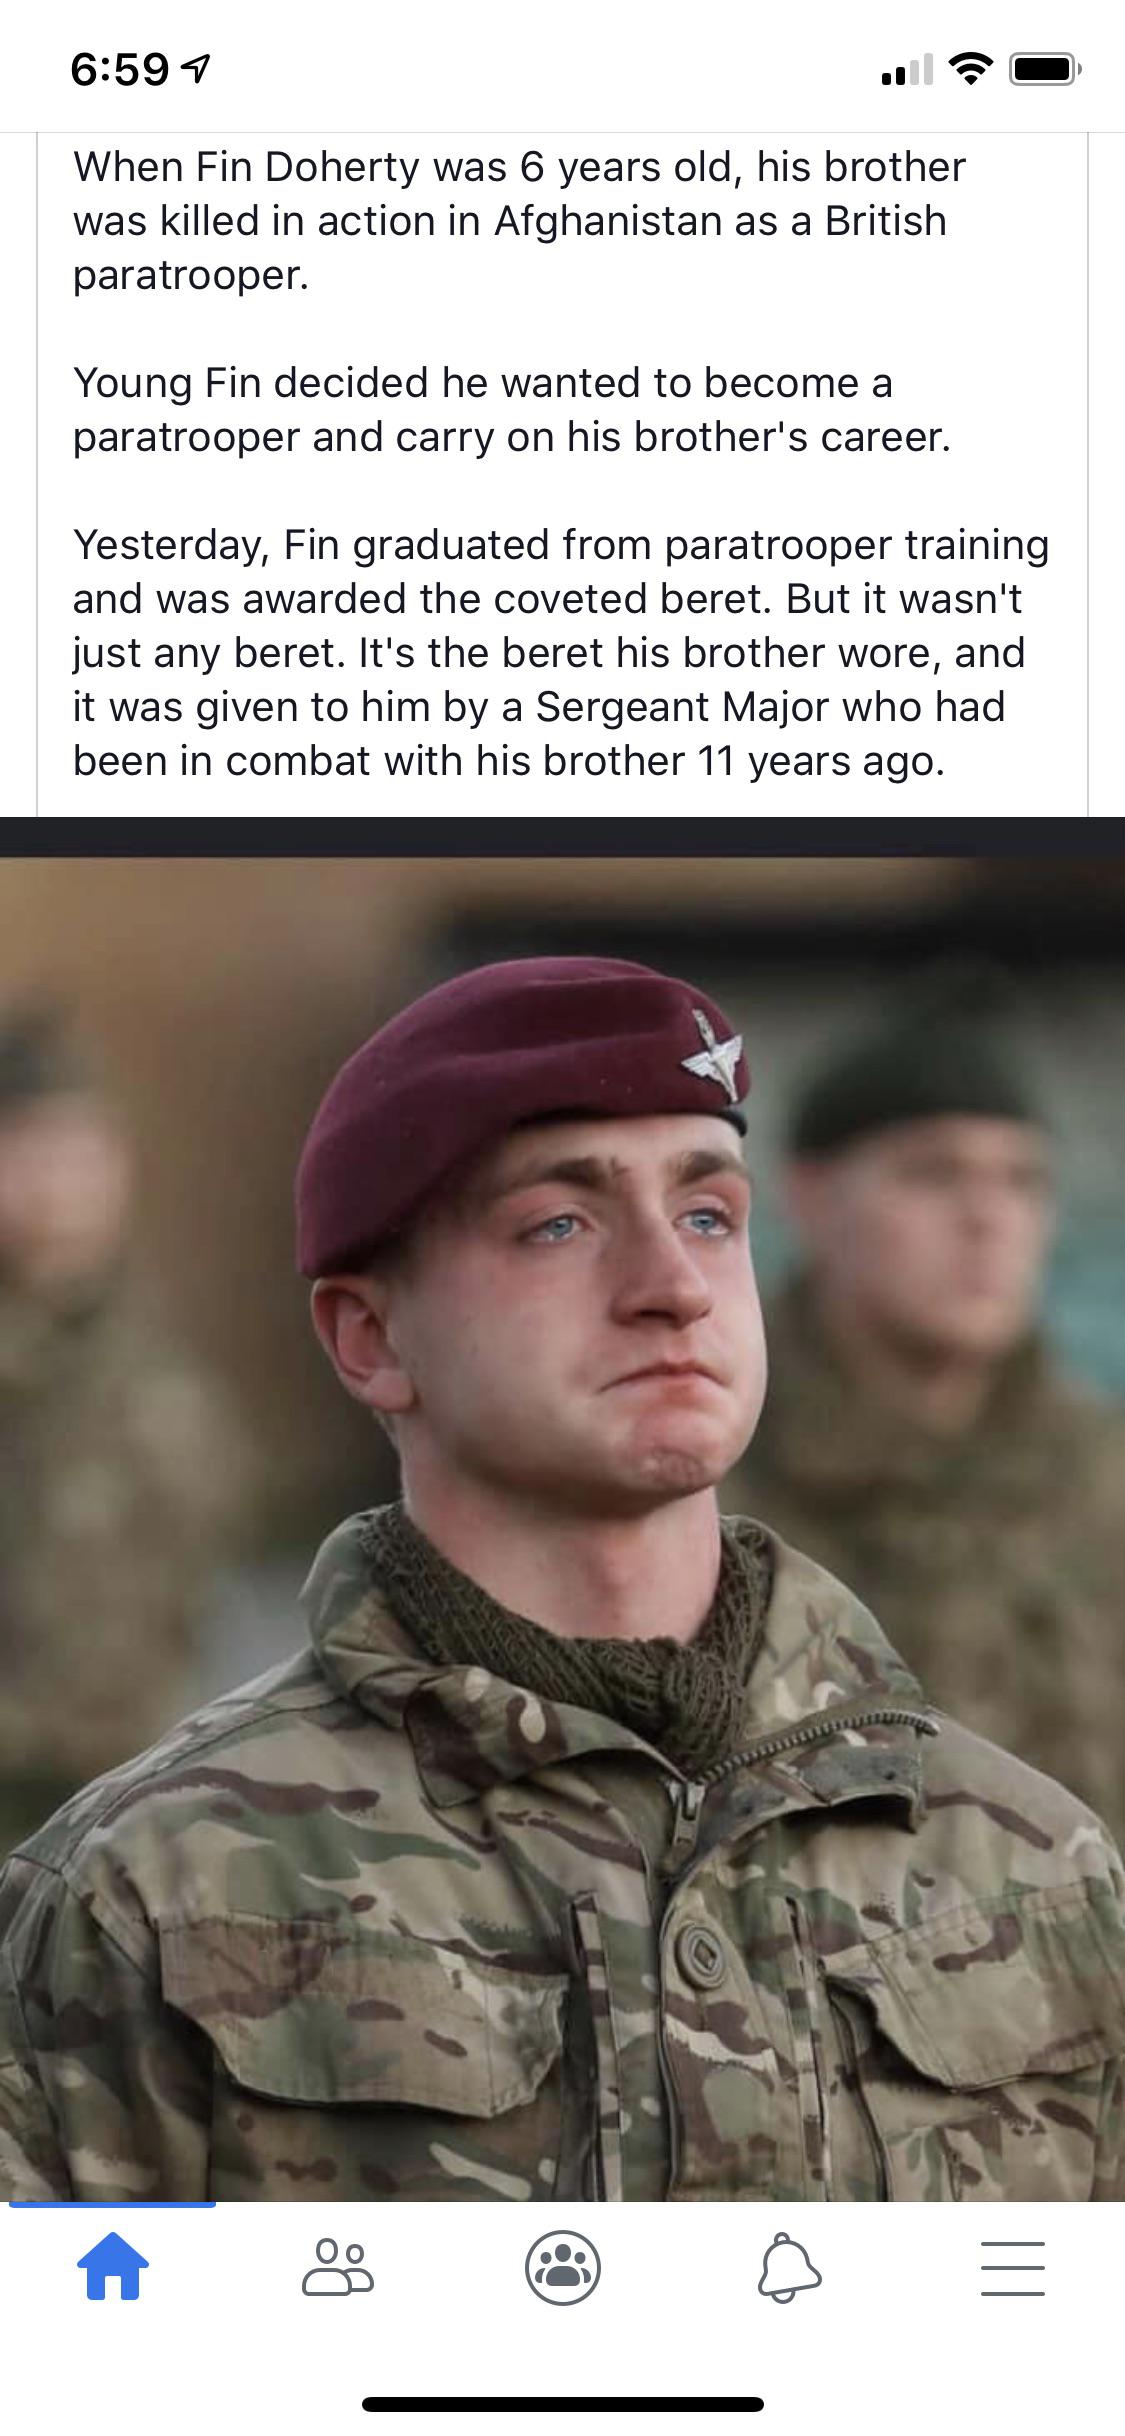 fin doherty - When Fin Doherty was 6 years old, his brother was killed in action in Afghanistan as a British paratrooper. Young Fin decided he wanted to become a paratrooper and carry on his brother's career. Yesterday, Fin graduated from paratrooper trai